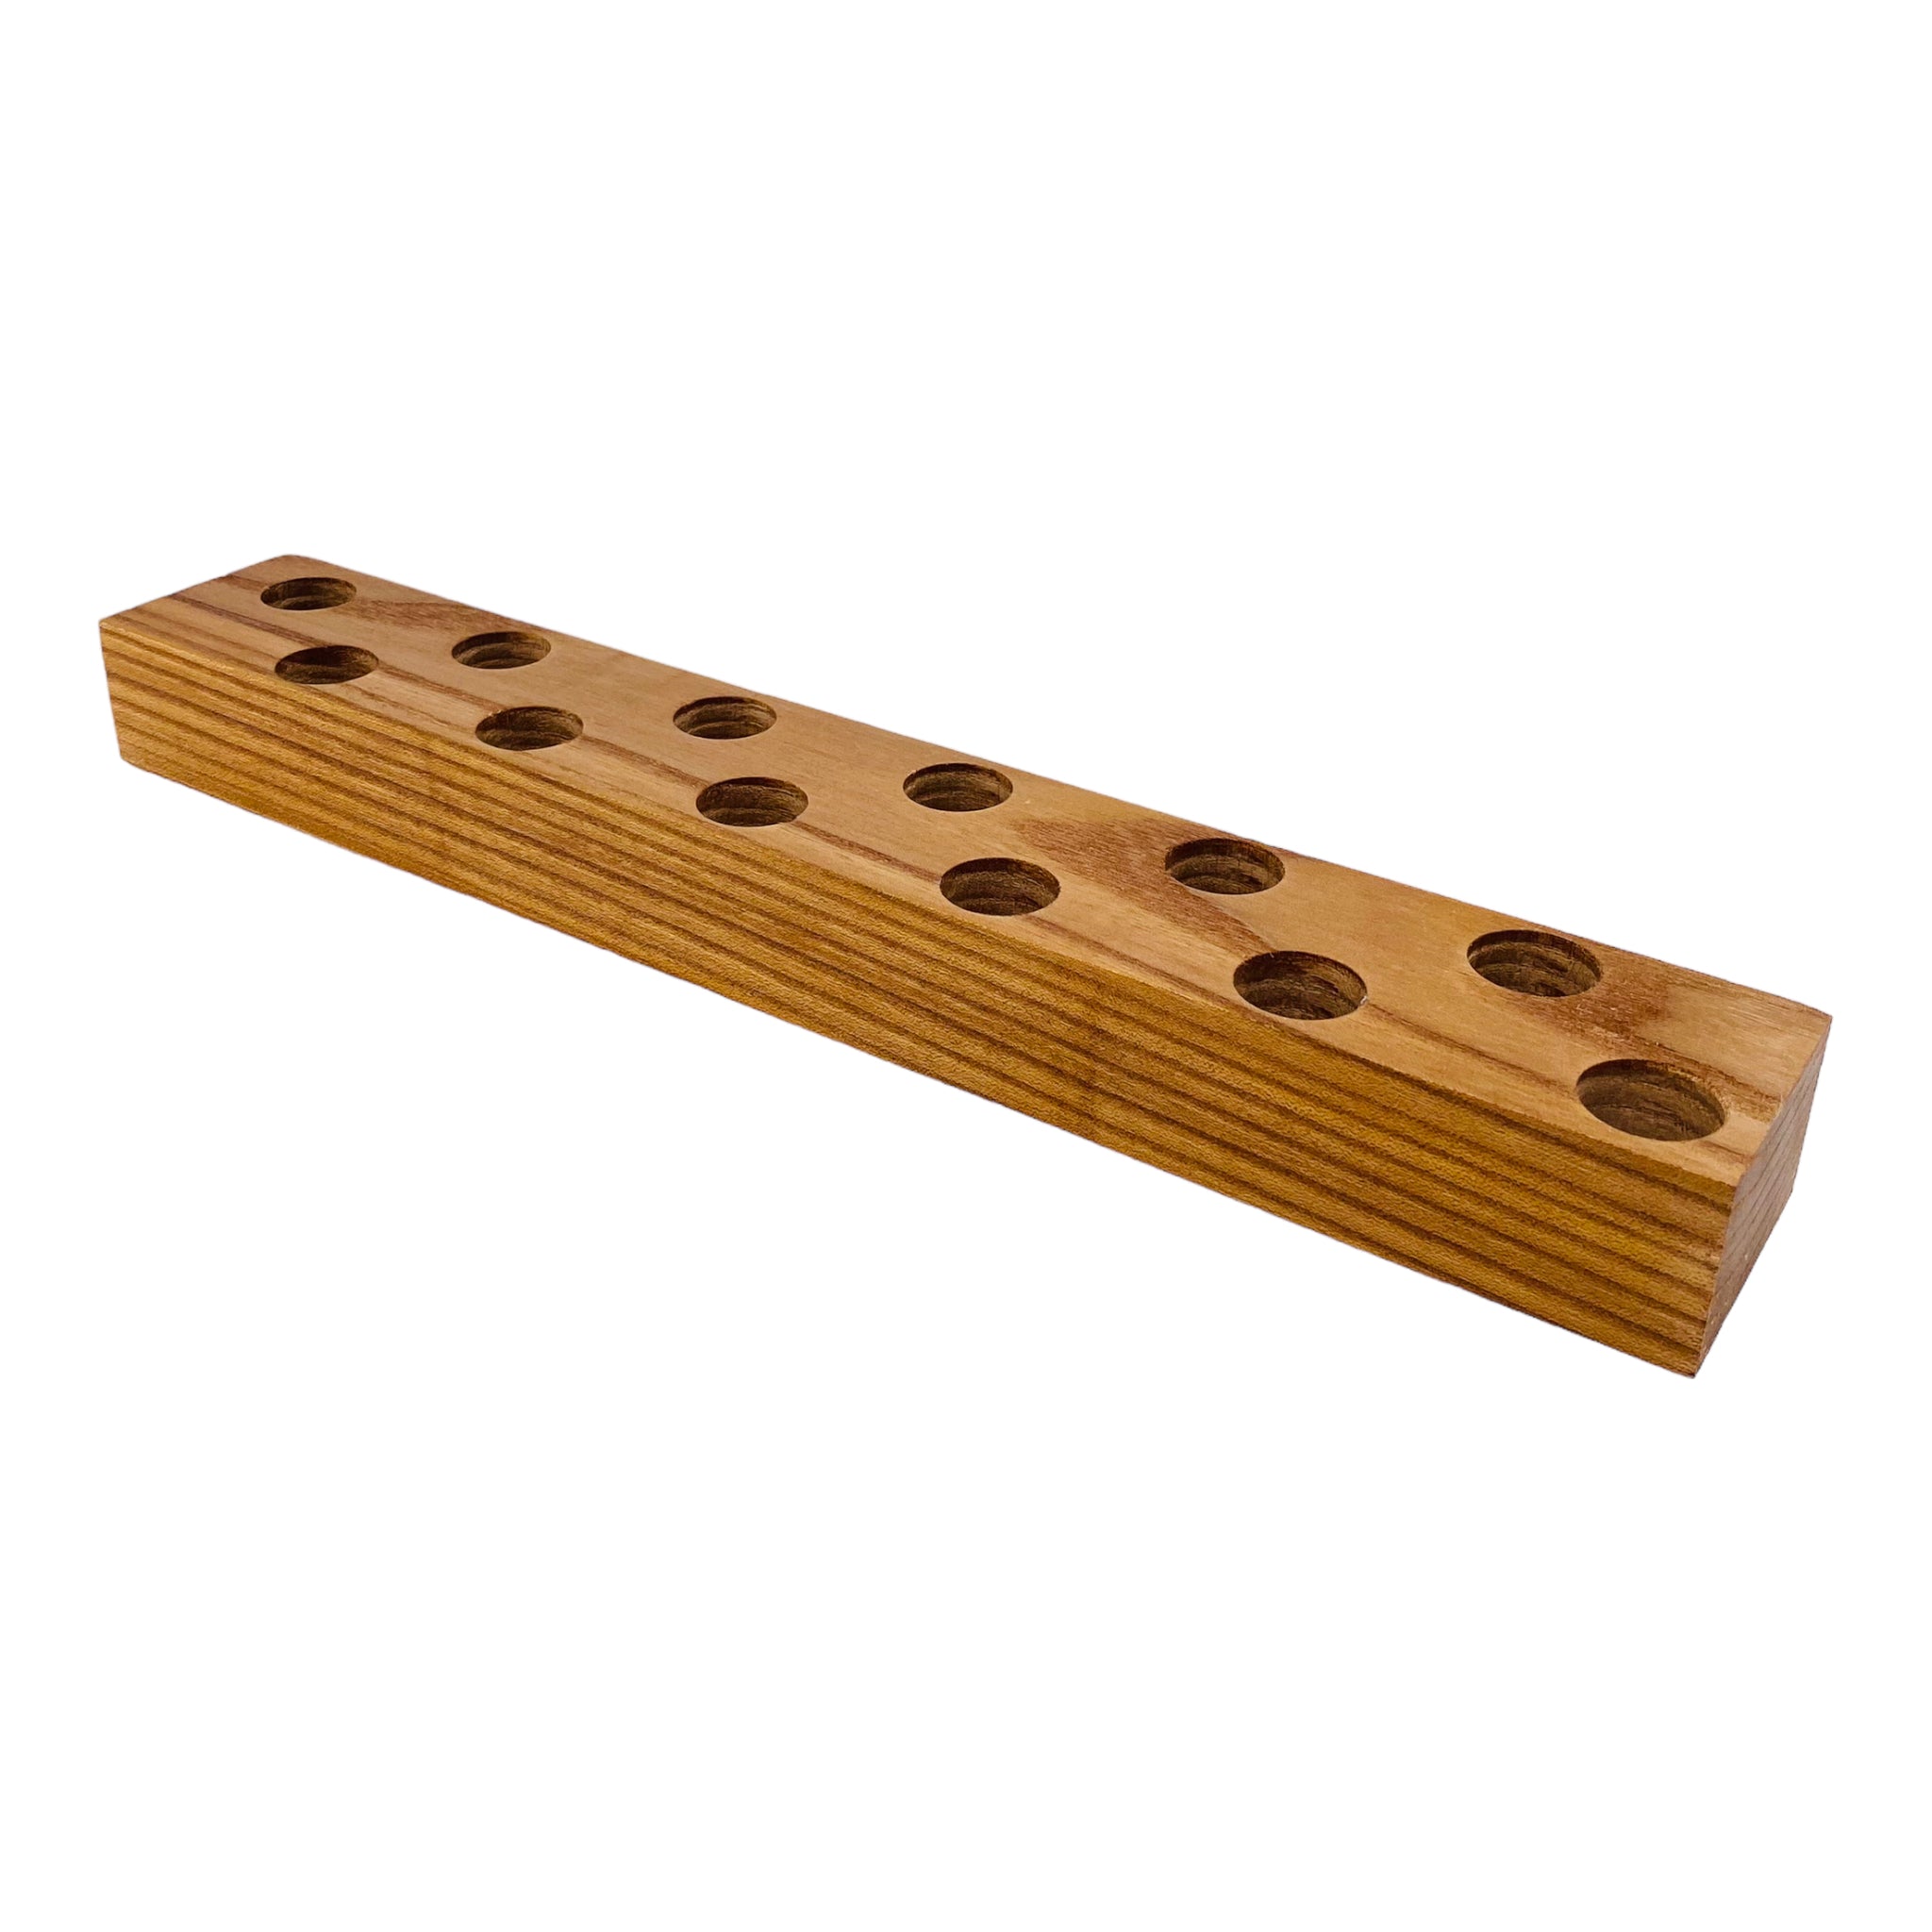 12 Hole Wood Display Stand Holder For 18mm Bong Bowl Pieces Or Quartz Bangers - Oak